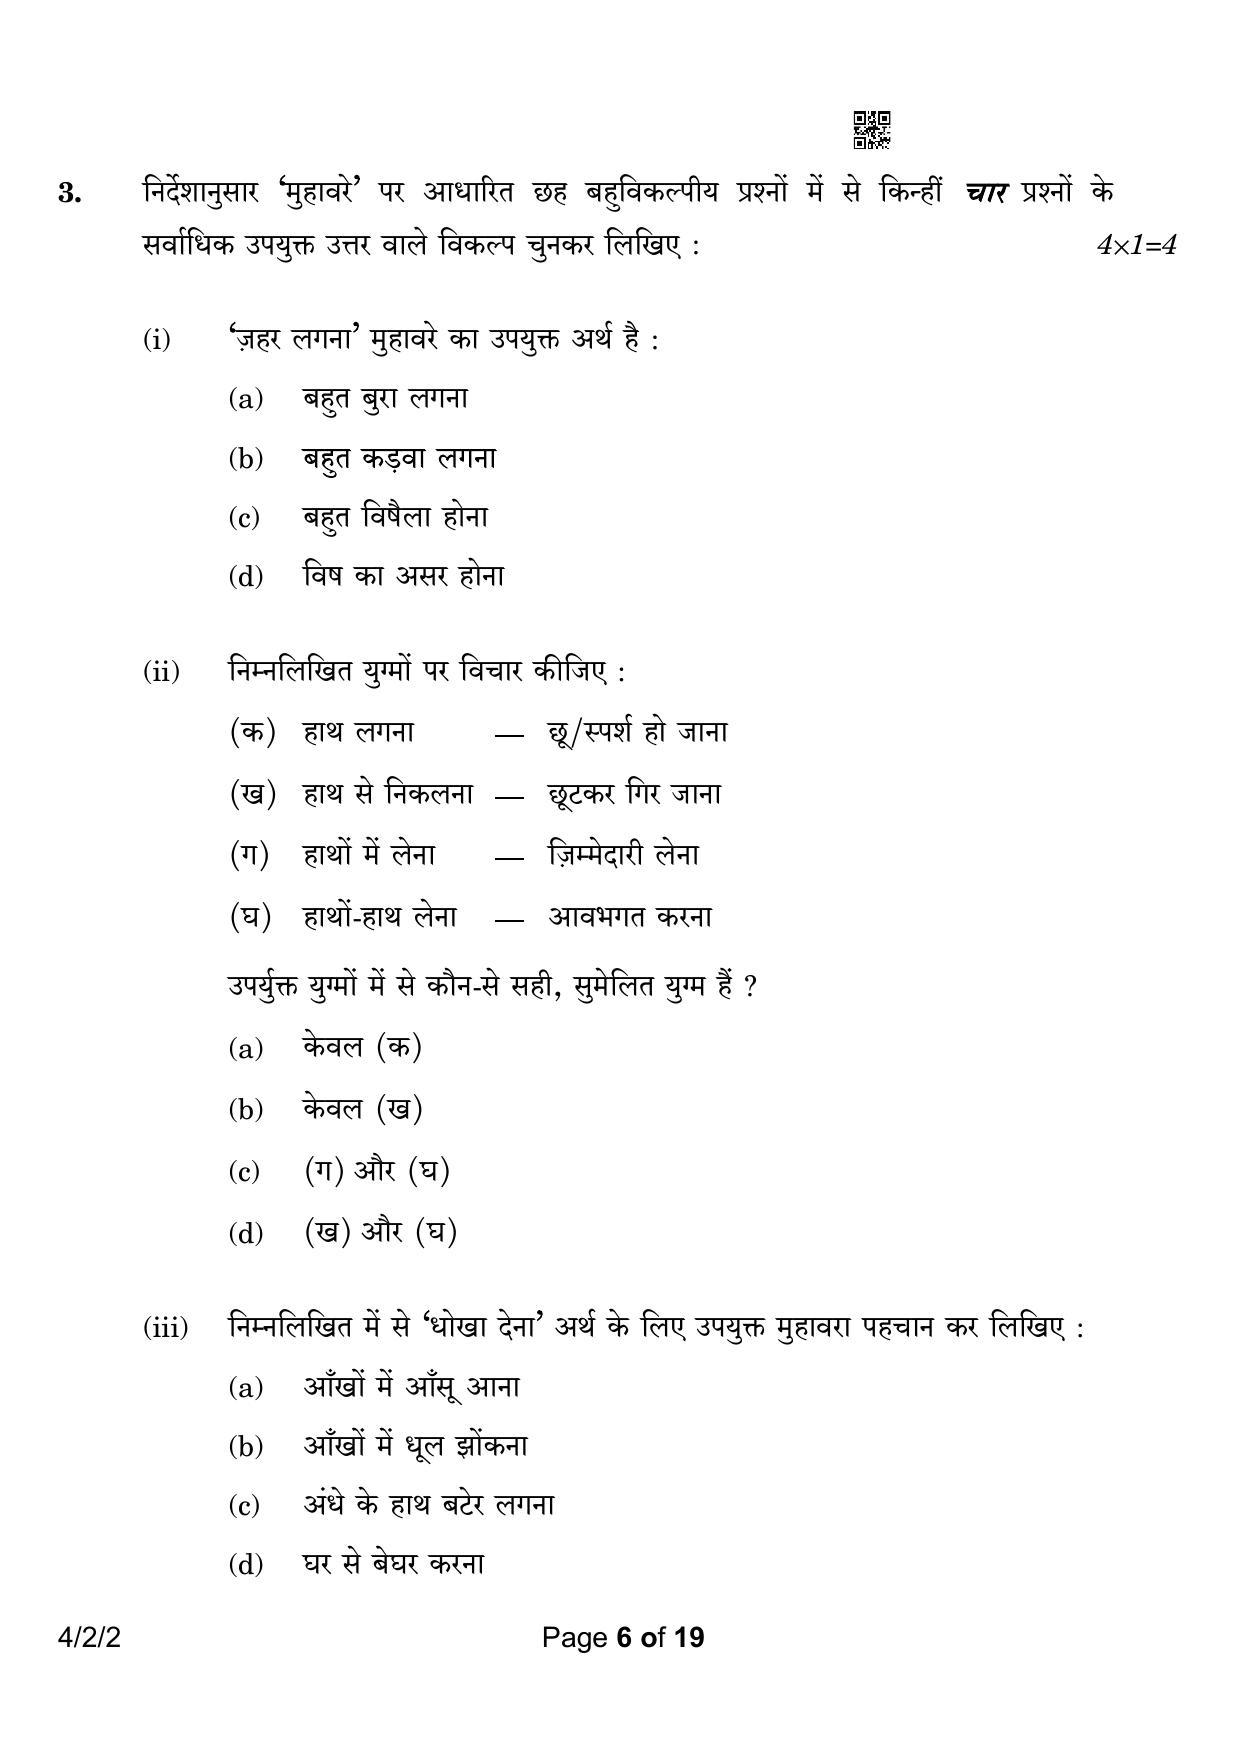 CBSE Class 10 4-2-2 Hindi B 2023 Question Paper - Page 6